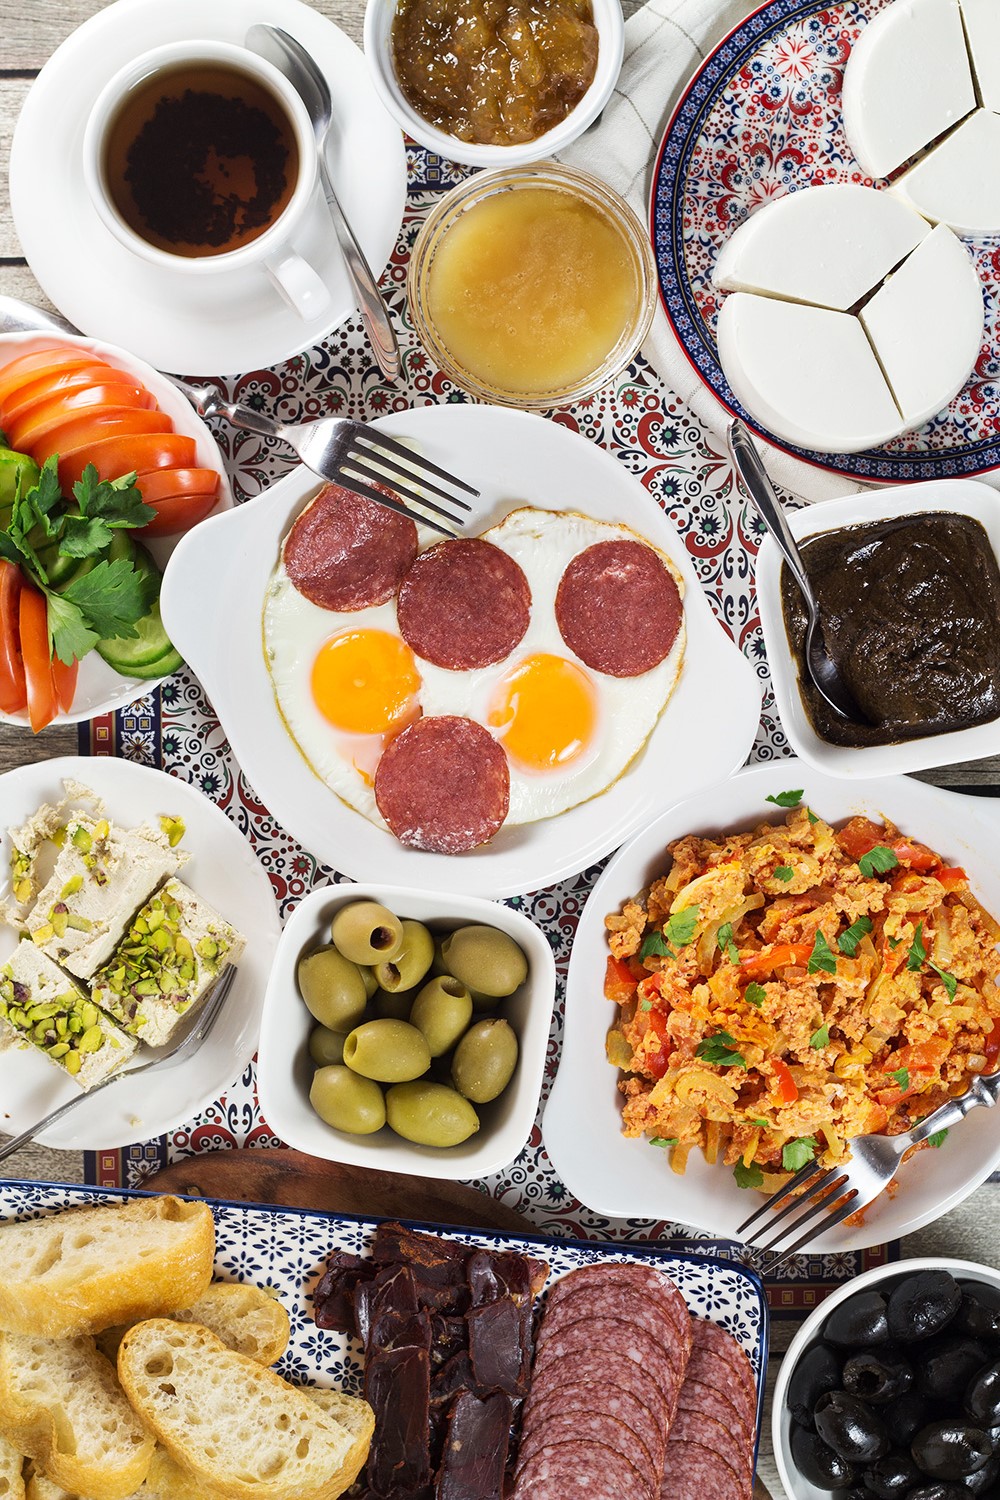 A look at the generous Turkish breakfast which features fresh bread, pastries, cold cuts, eggs, spreads, jams, cheese, veggies, and more! | cookingtheglobe.com